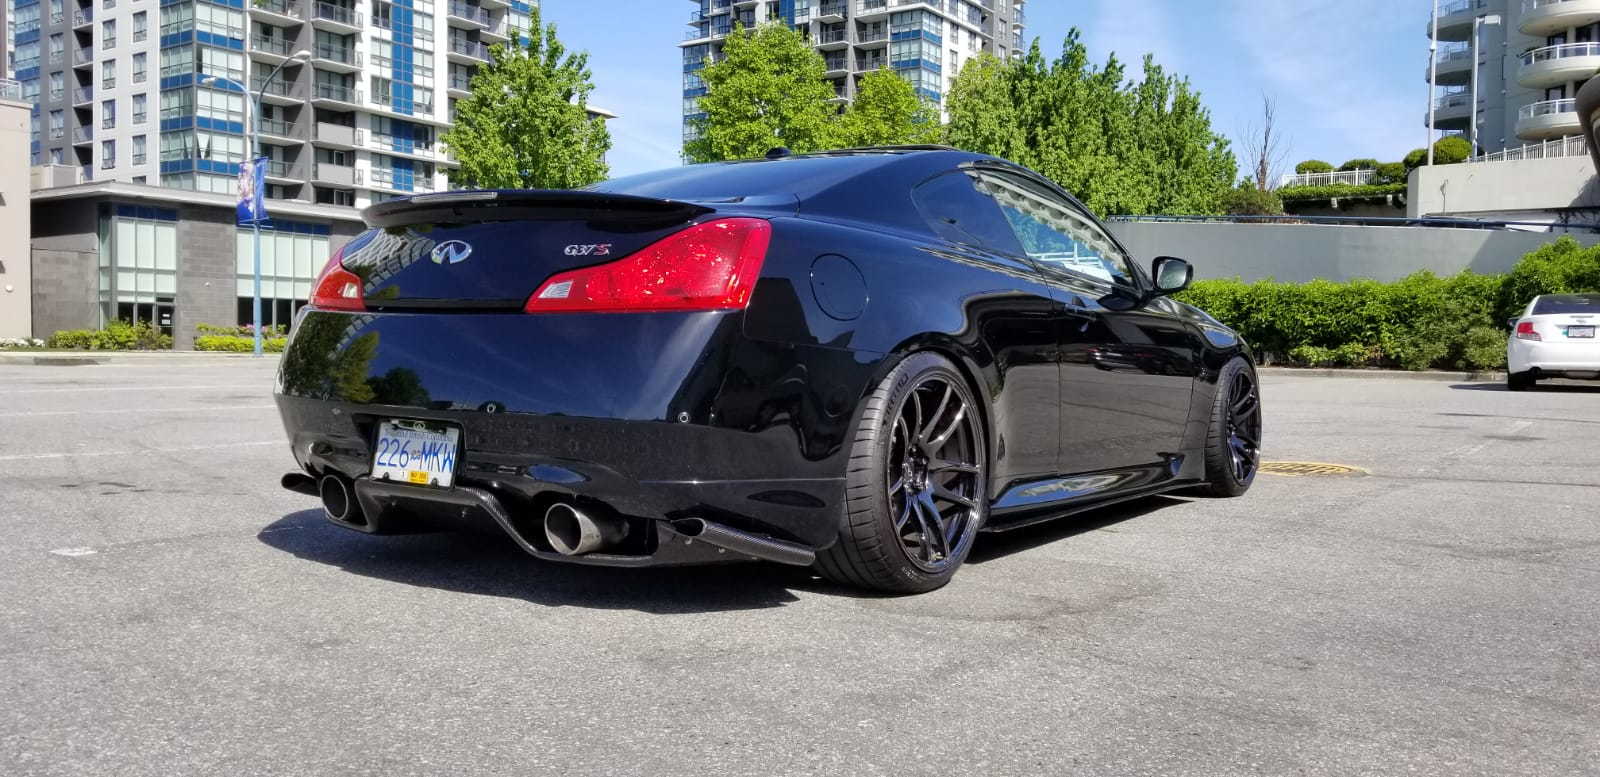 2010 Infiniti G37S Coupe Supercharged Fully Loaded - MyG37